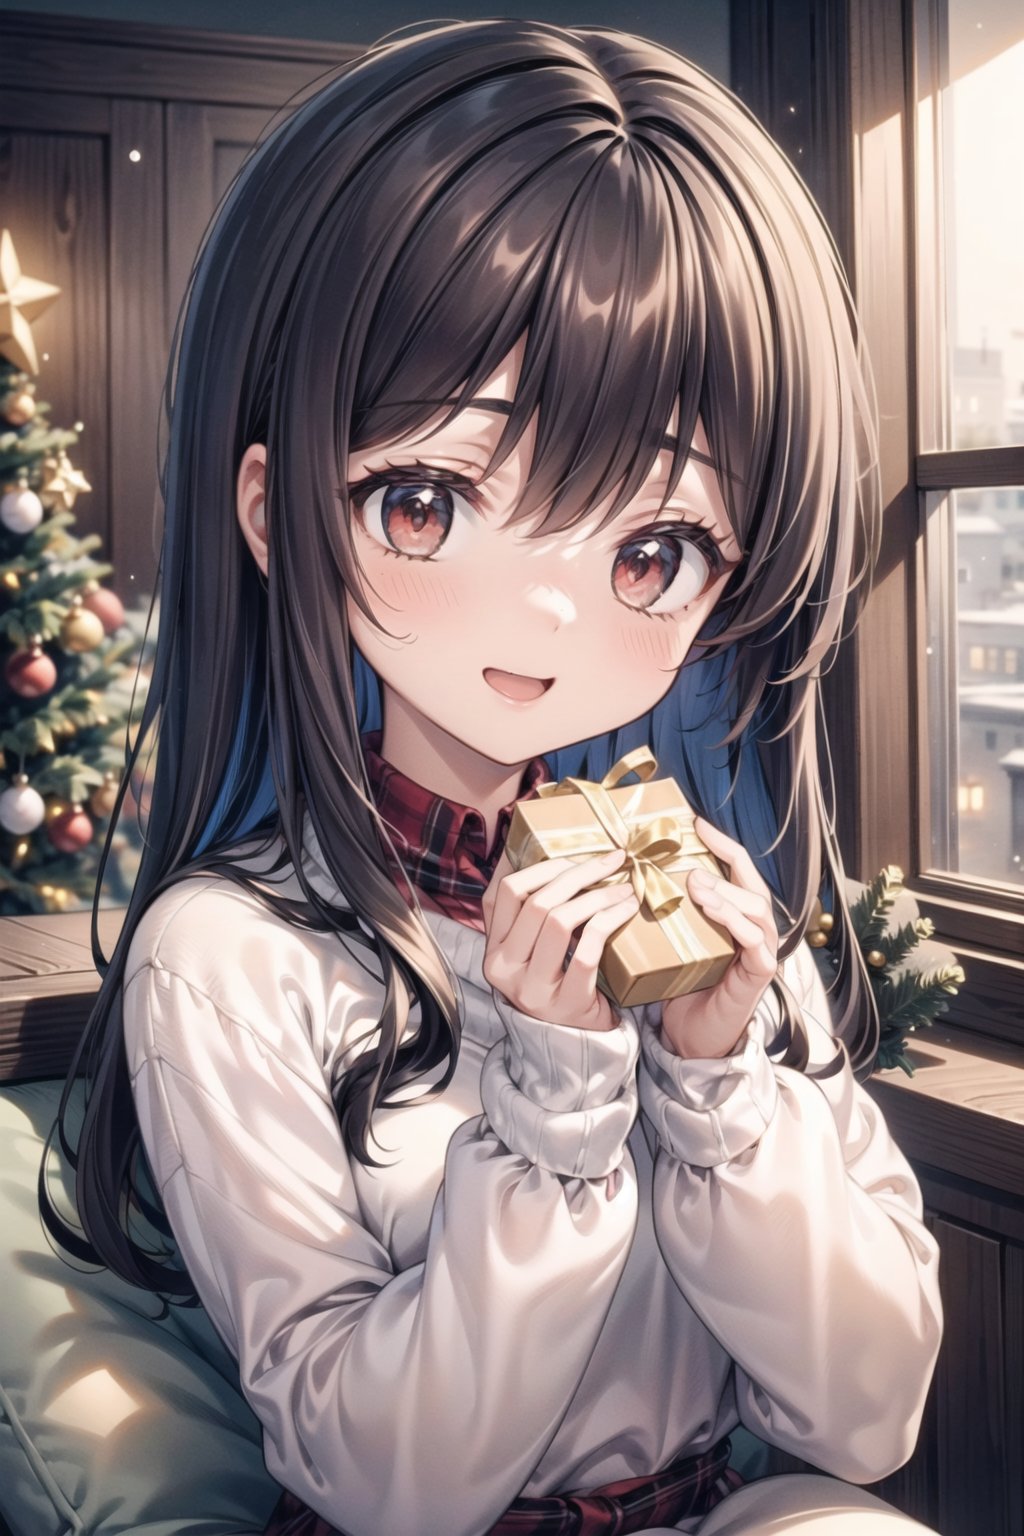 vibrant colors,  female,  masterpiece,  sharp focus,  best quality,  depth of field,  cinematic lighting,  ((solo,  adult woman)),  (illustration,  8k CG,  extremely detailed),  masterpiece,  ultra-detailed,  1 girl,  long hair,  brown hair,  flowing hair,  red eyes,  beautiful girl,  amidst the winter festivities,  a girl dons a charming Christmas sweater,  radiating warmth and holiday cheer. The detailed illustration captures the joyful atmosphere as she embraces the coziness of the season,  adorned in festive patterns,  dressed in winter attire that complements the holiday spirit,  the room is bathed in soft,  festive lighting,  creating a warm ambiance. Every detail,  from the intricate design of the sweater to the girl's cheerful expression,  contributes to the festive charm of the scene,  the illustration paints a heartwarming portrait of a girl immersed in the joy of the holiday season,  where the Christmas sweater becomes a delightful symbol of comfort and merriment,  echoing the spirit of festive celebration.,<lora:EMS-179-EMS:0.400000>,<lora:EMS-173539-EMS:0.400000>,<lora:EMS-50097-EMS:0.400000>